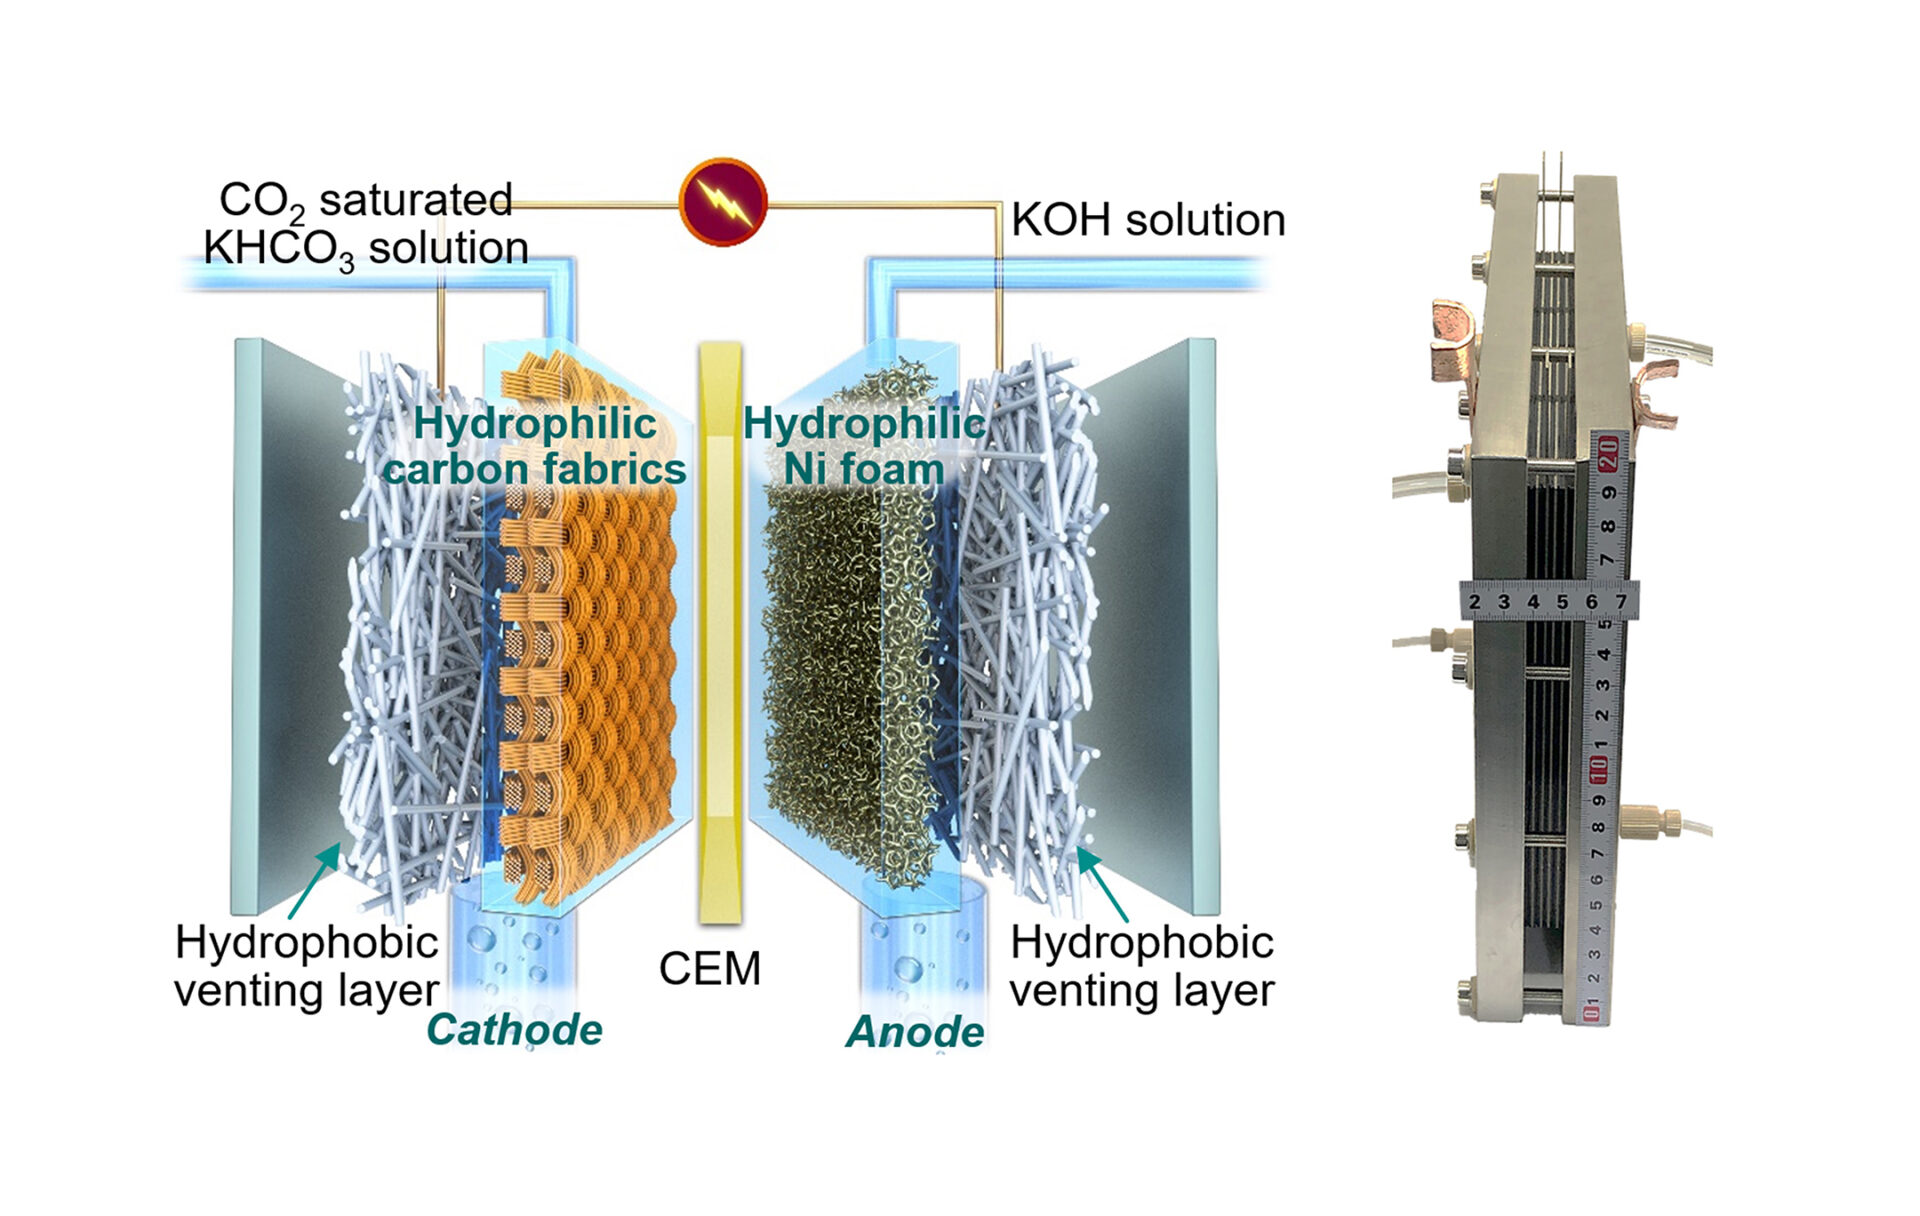 Left: a schematic showing the key components of the reactor and working mechanism. Right: a picture of the CO2 stack, which is a demonstration of the commercial reactors.